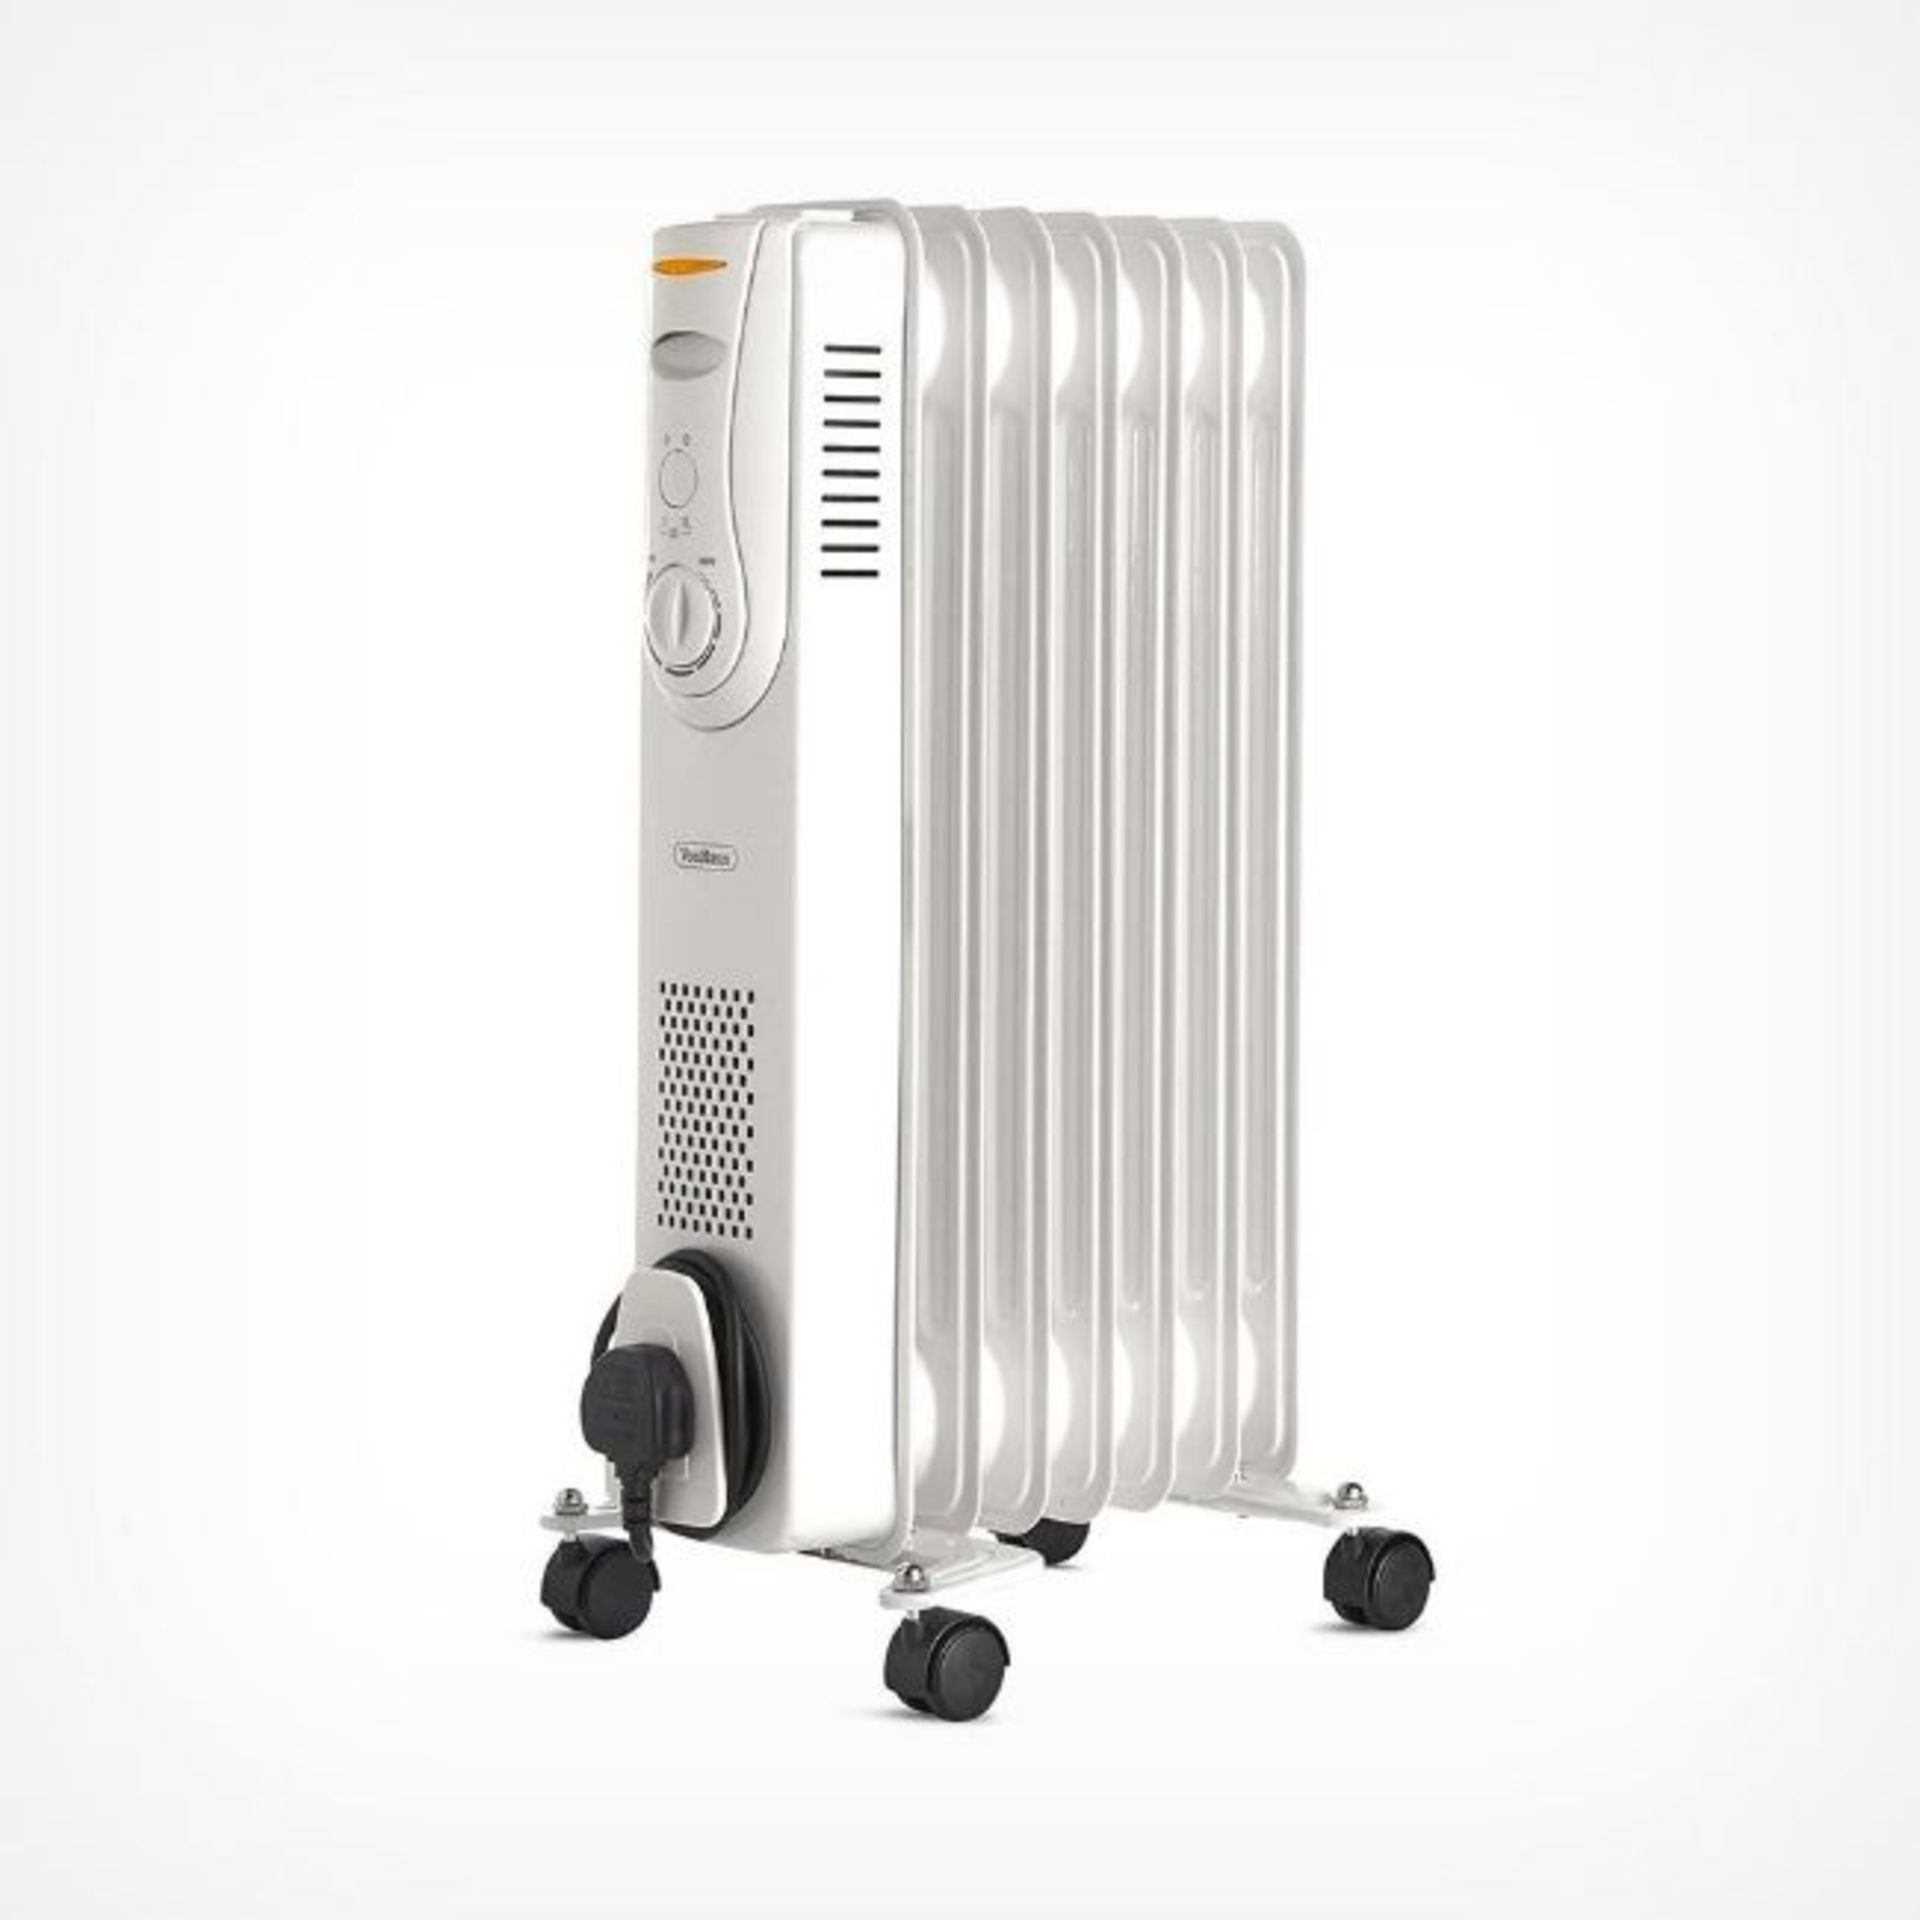 (H66) 7 Fin 1500W Oil Filled Radiator - White Powerful 1500W Radiator With 7 Oil-Filled Fins ...